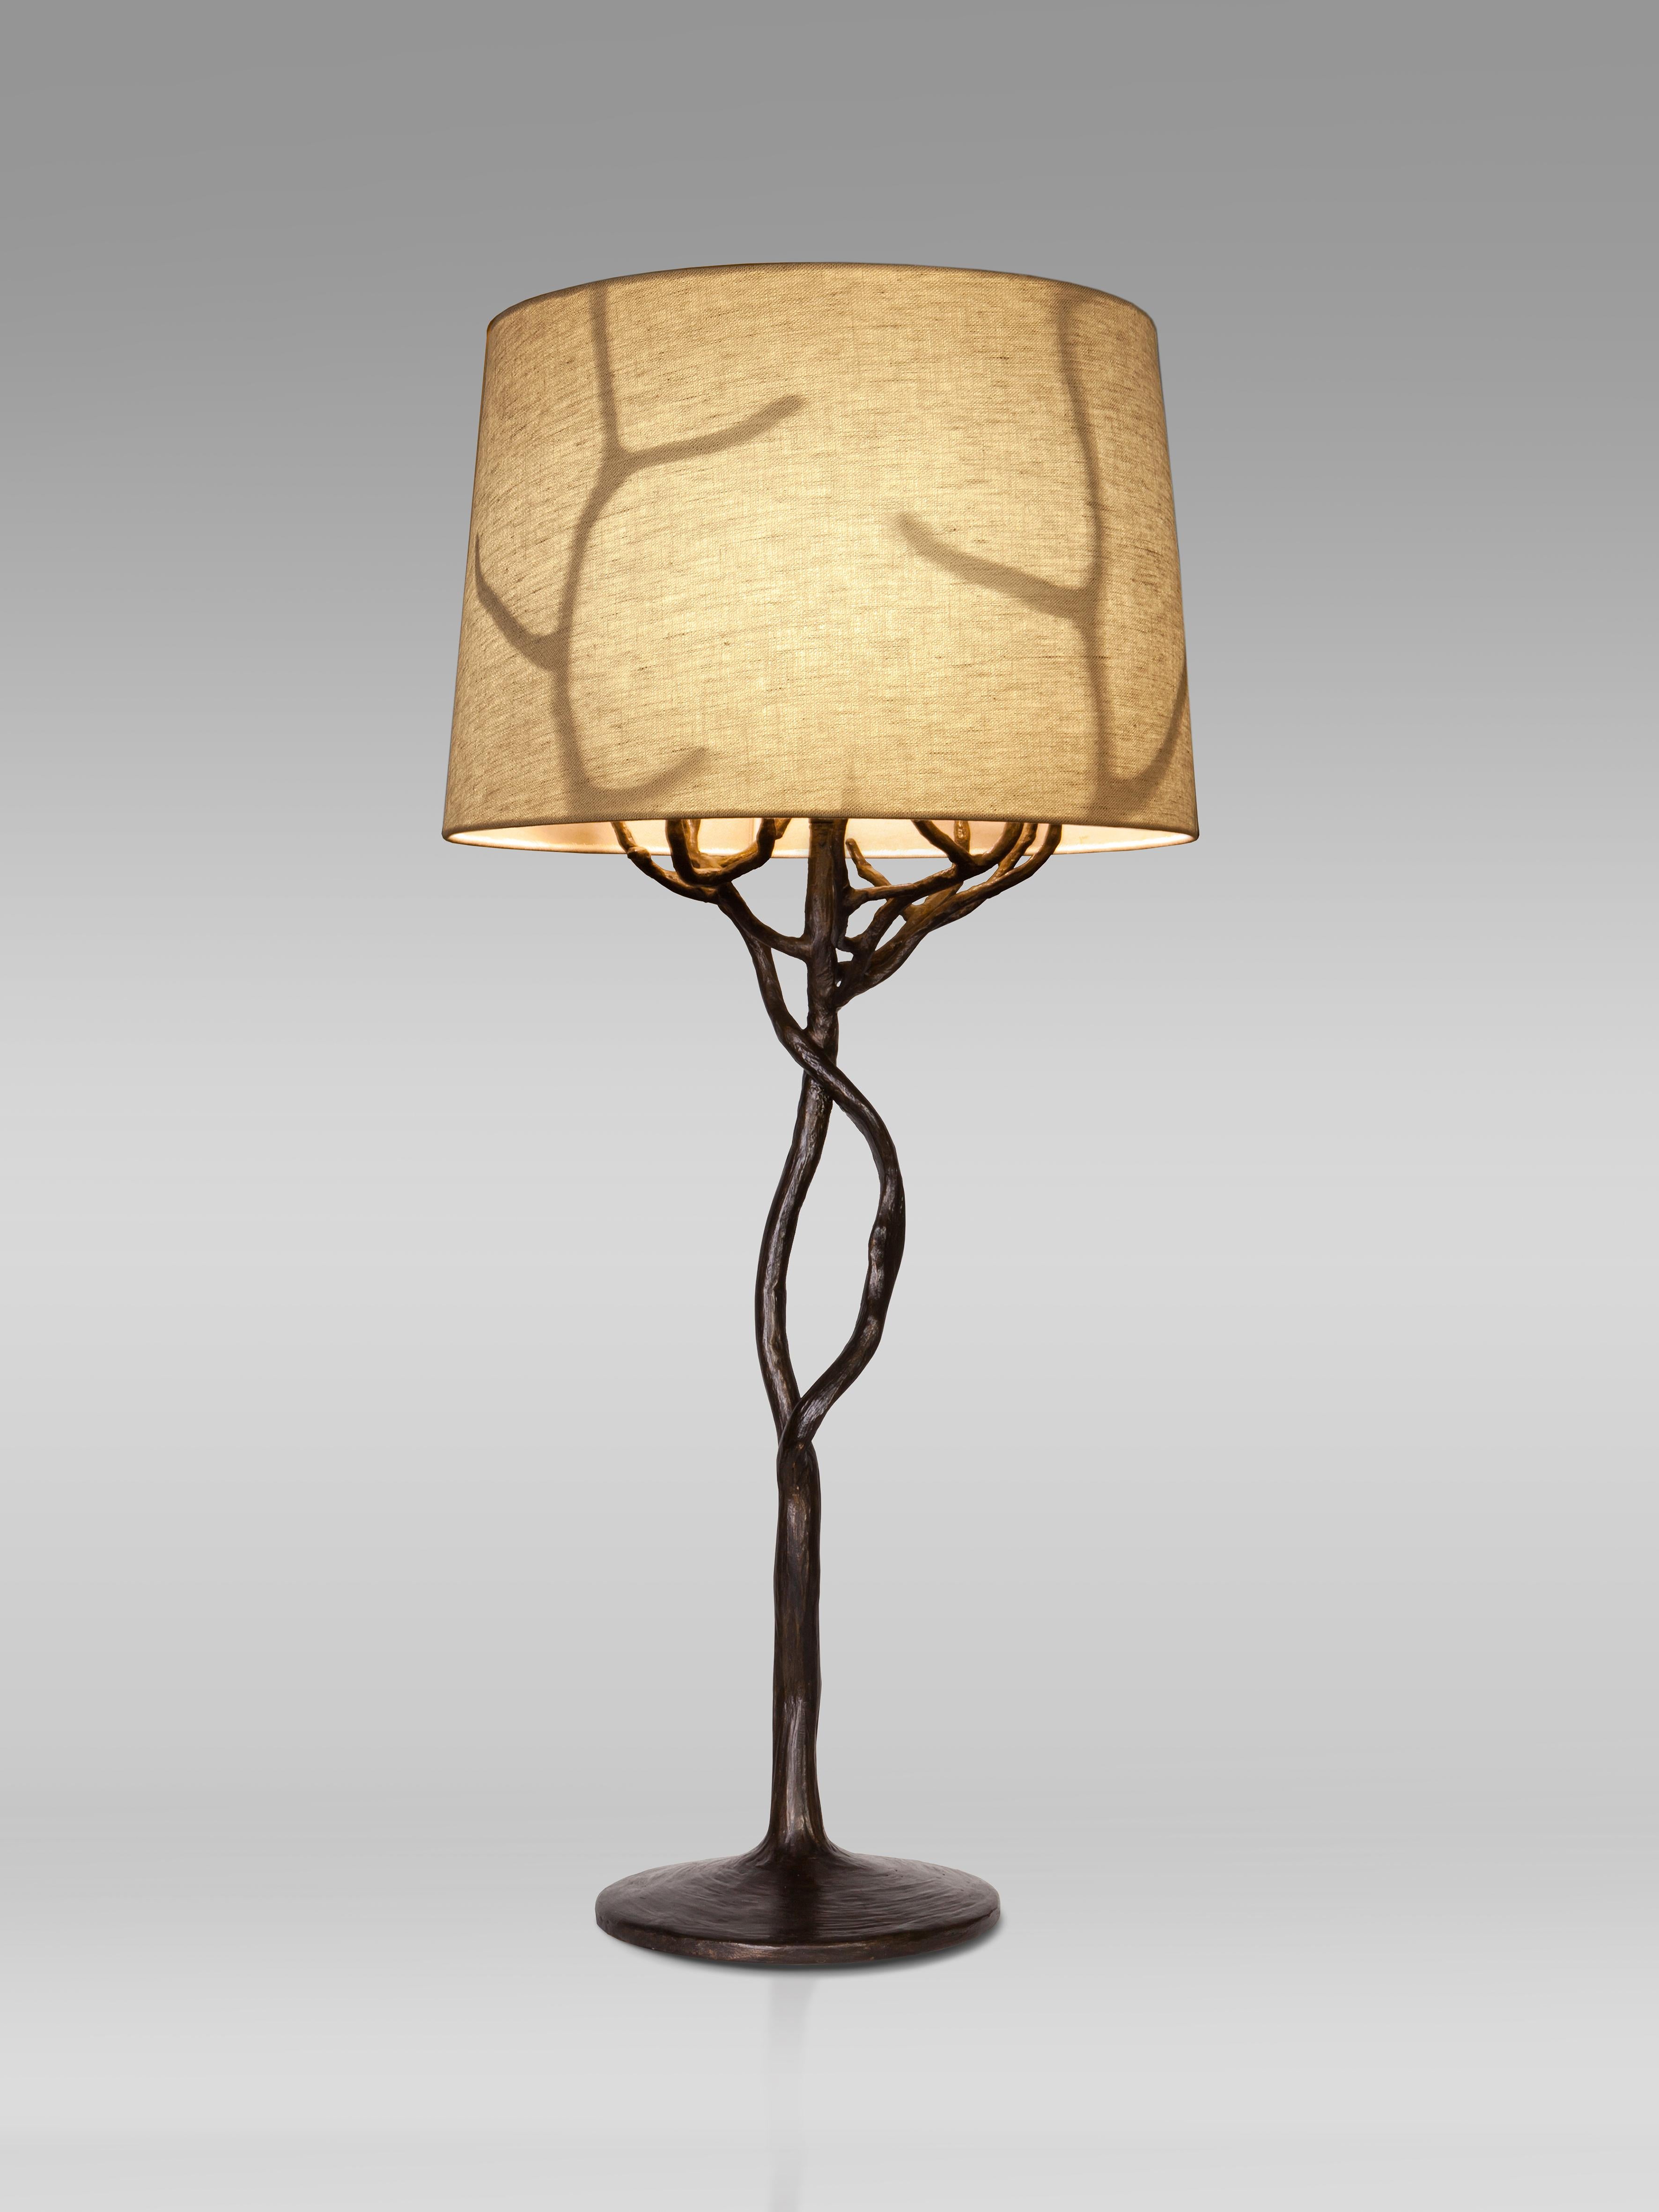 Organic forms and natural motifs. The Etna table lamp is individually hammered and hand formed. Each piece has been skillfully finished to resemble the texture of tree bark. Also available in Antique Gold Finish. Custom size upon request.


Linen